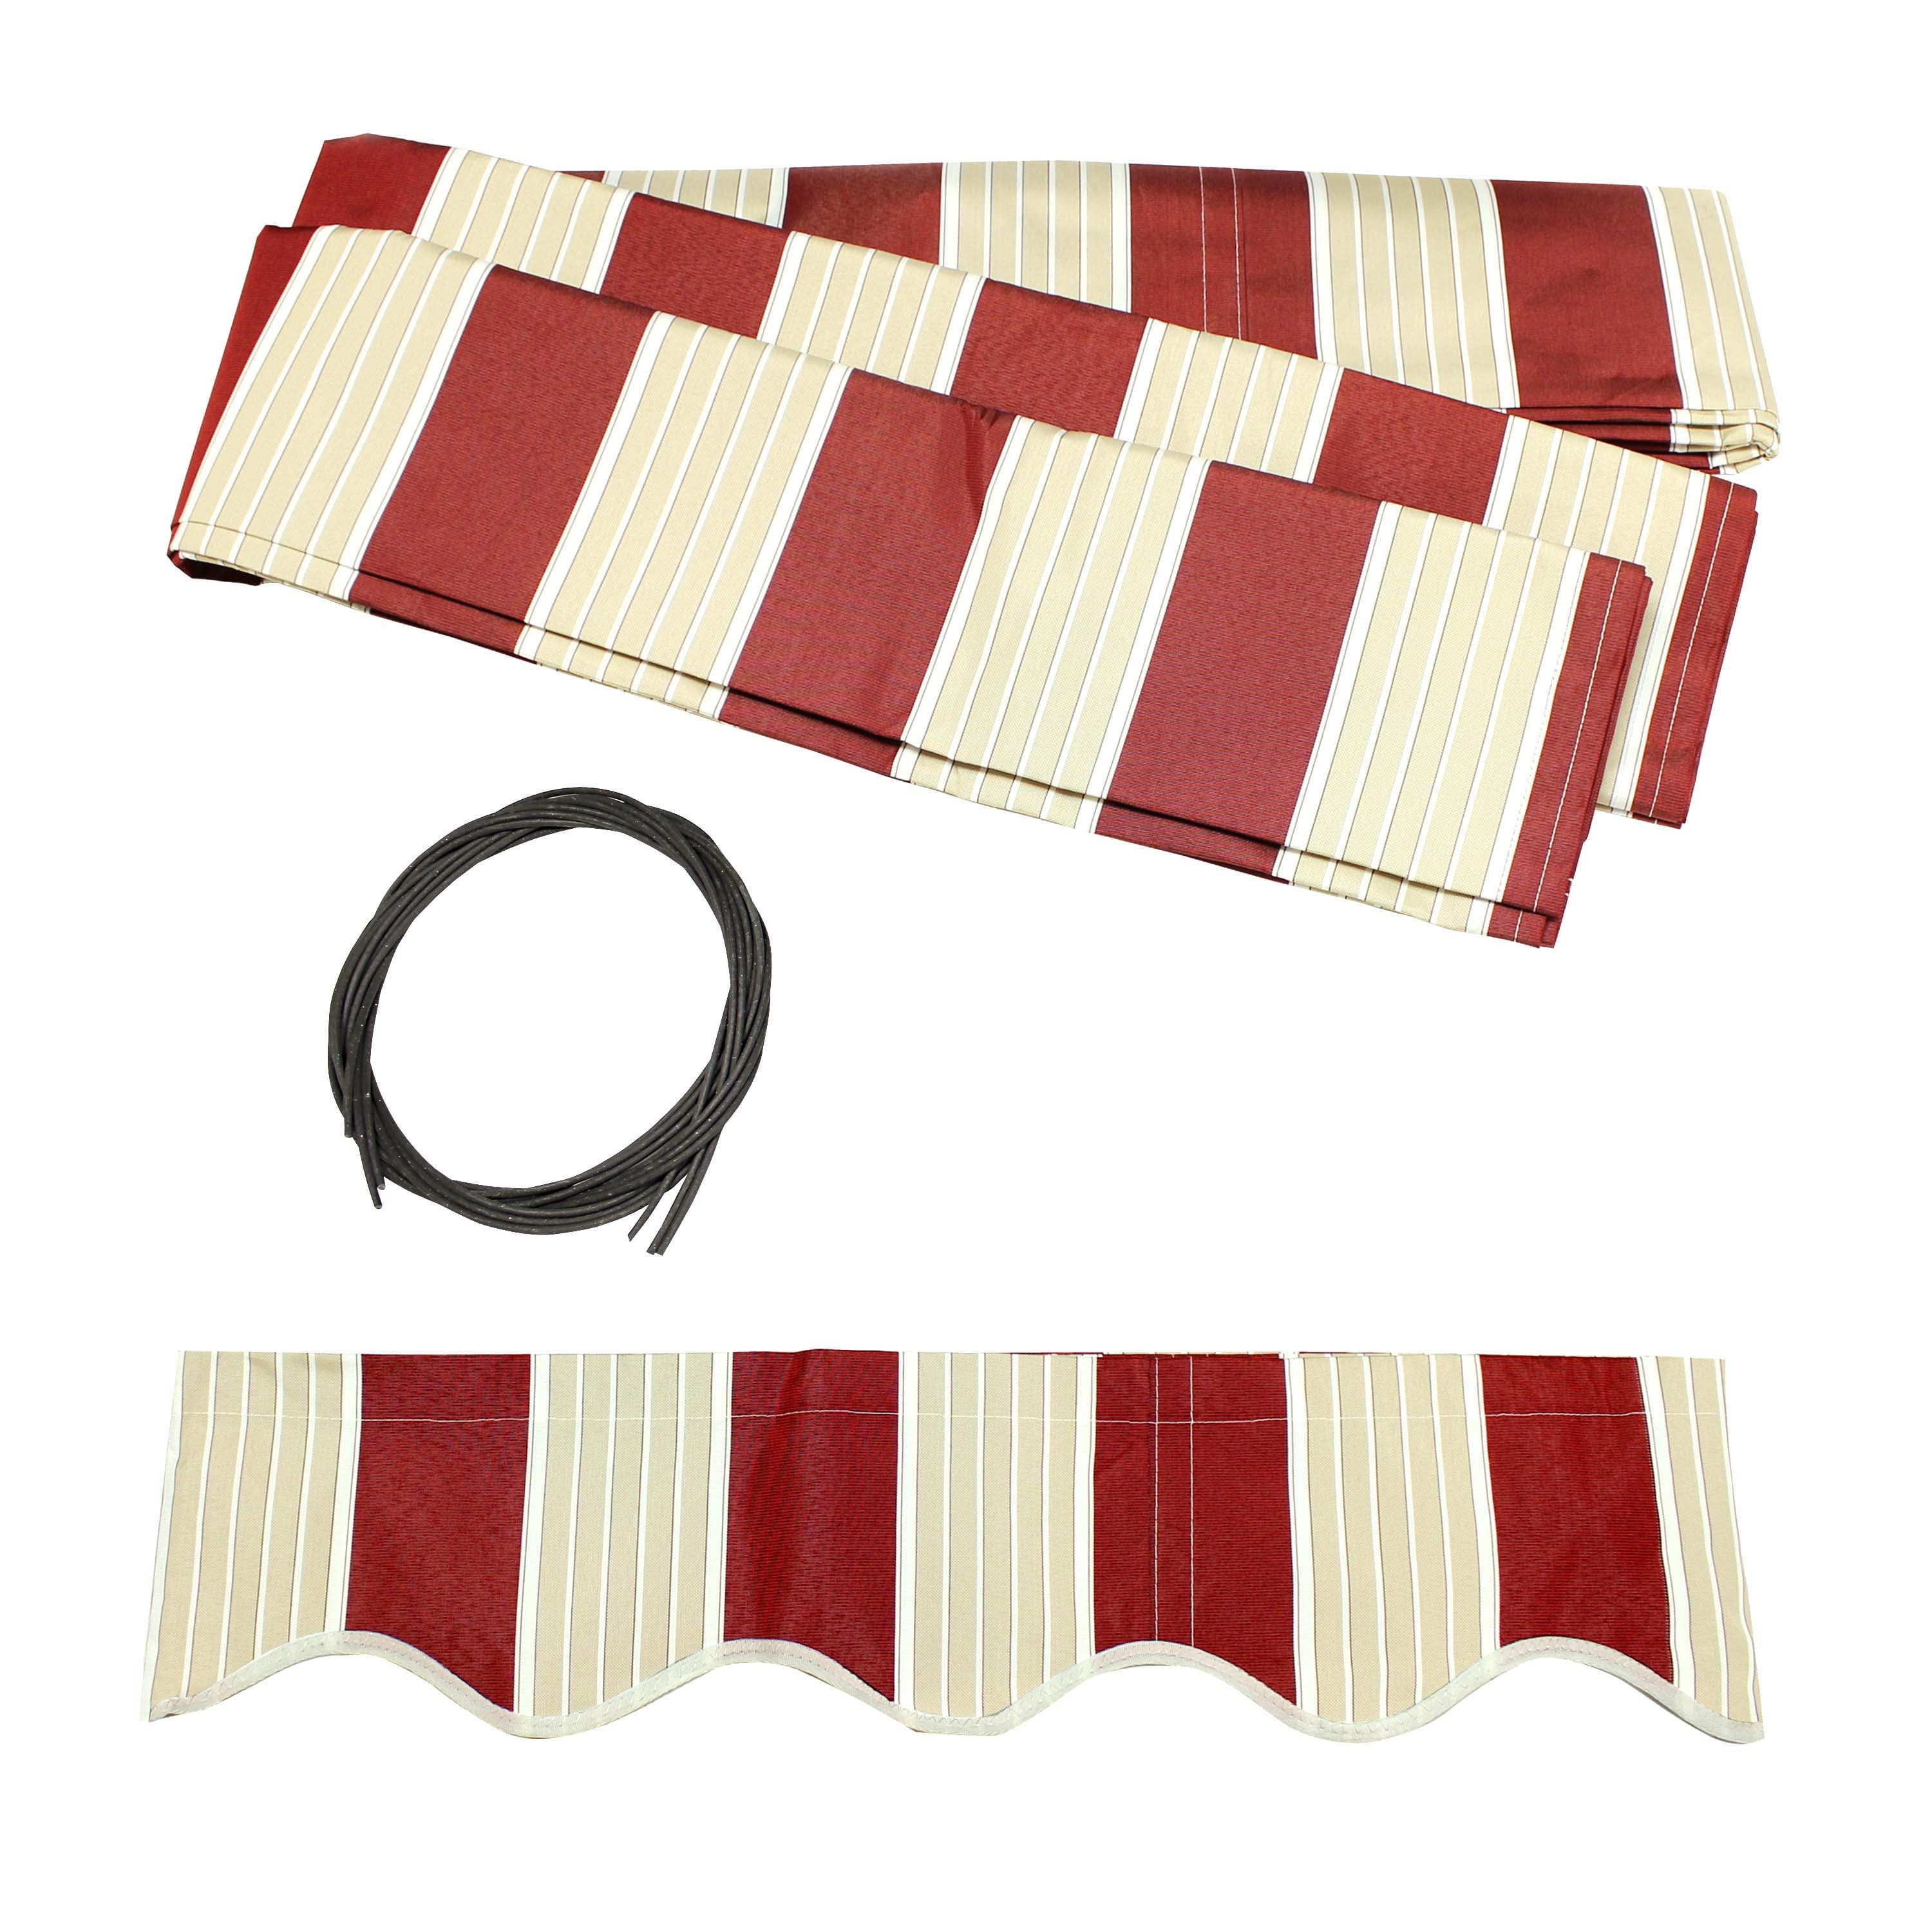 ALEKO Fabric Replacement For 16x10 Ft Retractable Awning Multistripe Red Color 